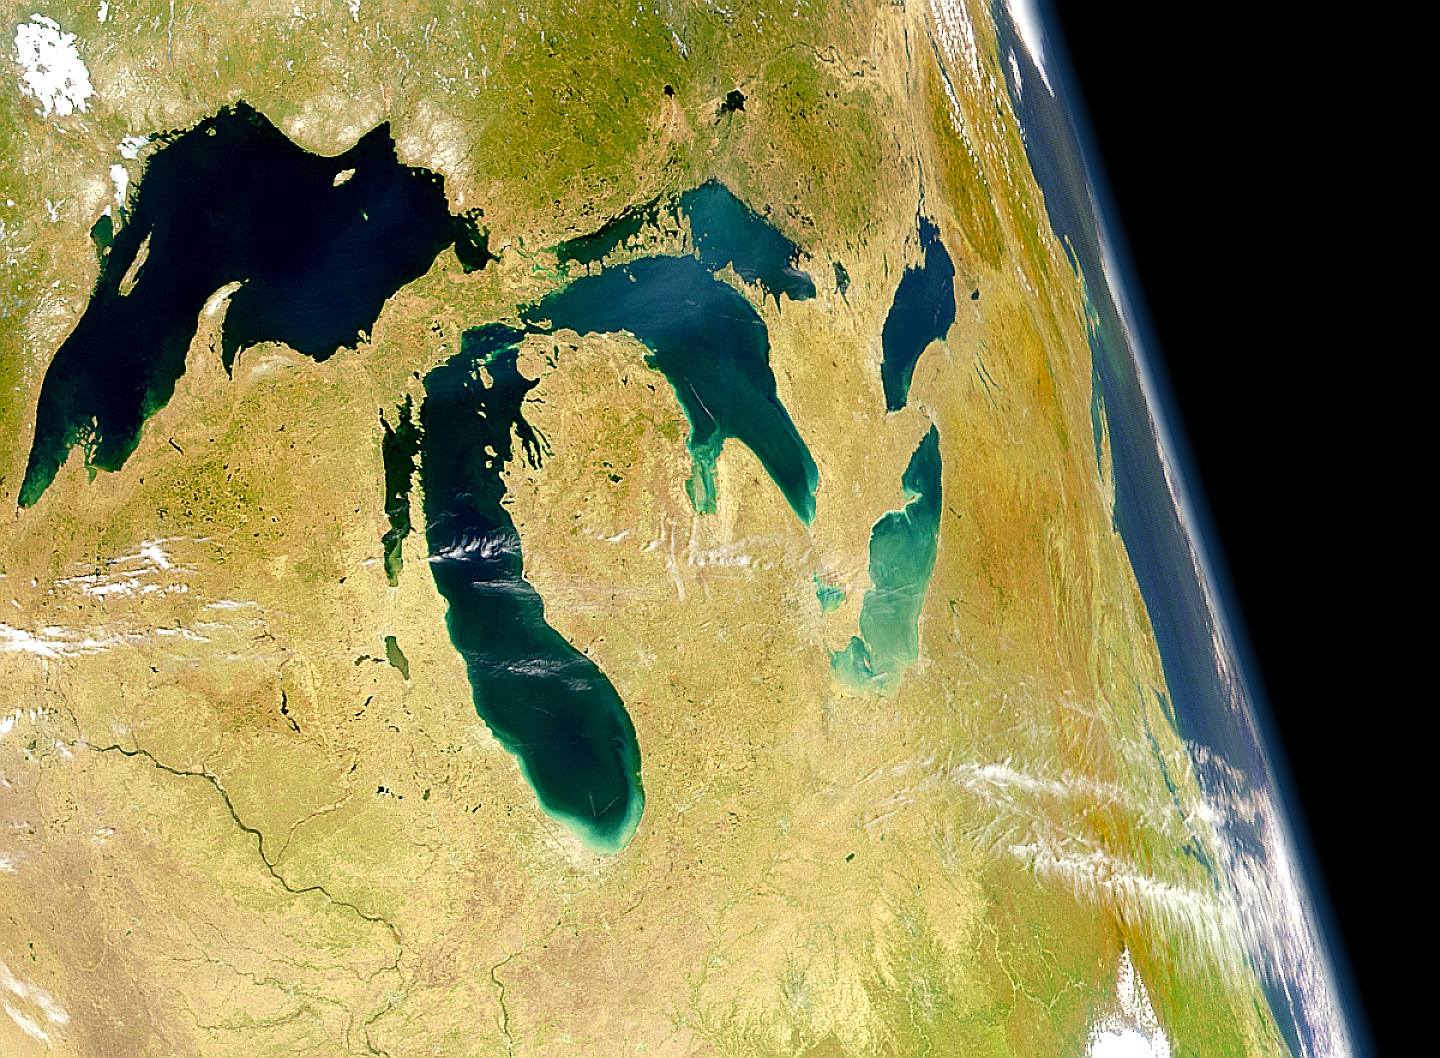 Image of the Great Lakes from space